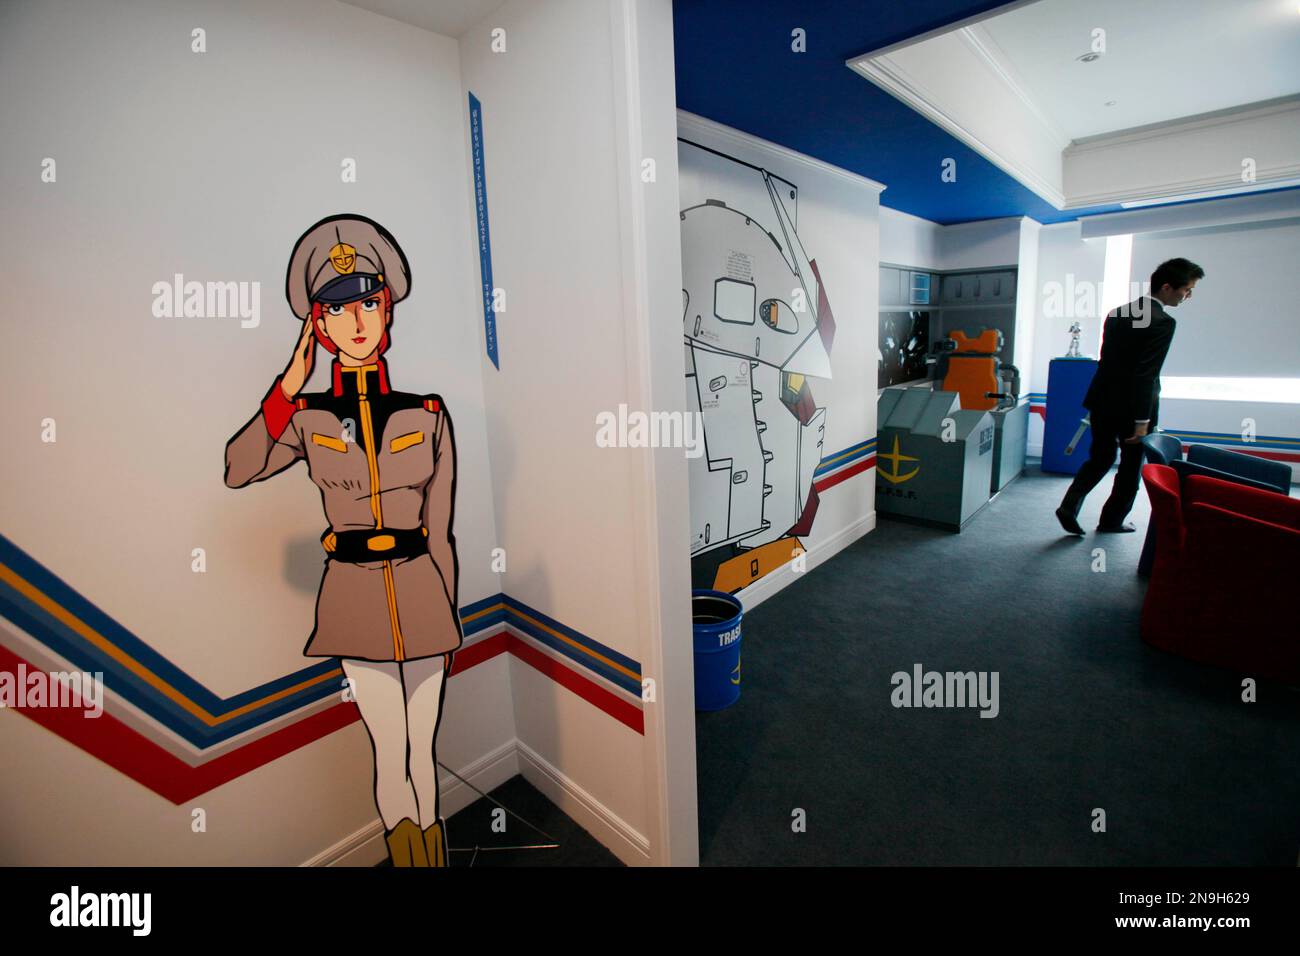 A cutout of Lt. Matilda Ajan, a Gundam character, greets guests in a  special room designed after the popular Japanese animation series at a  hotel in Tokyo Thursday, June 28, 2012, one